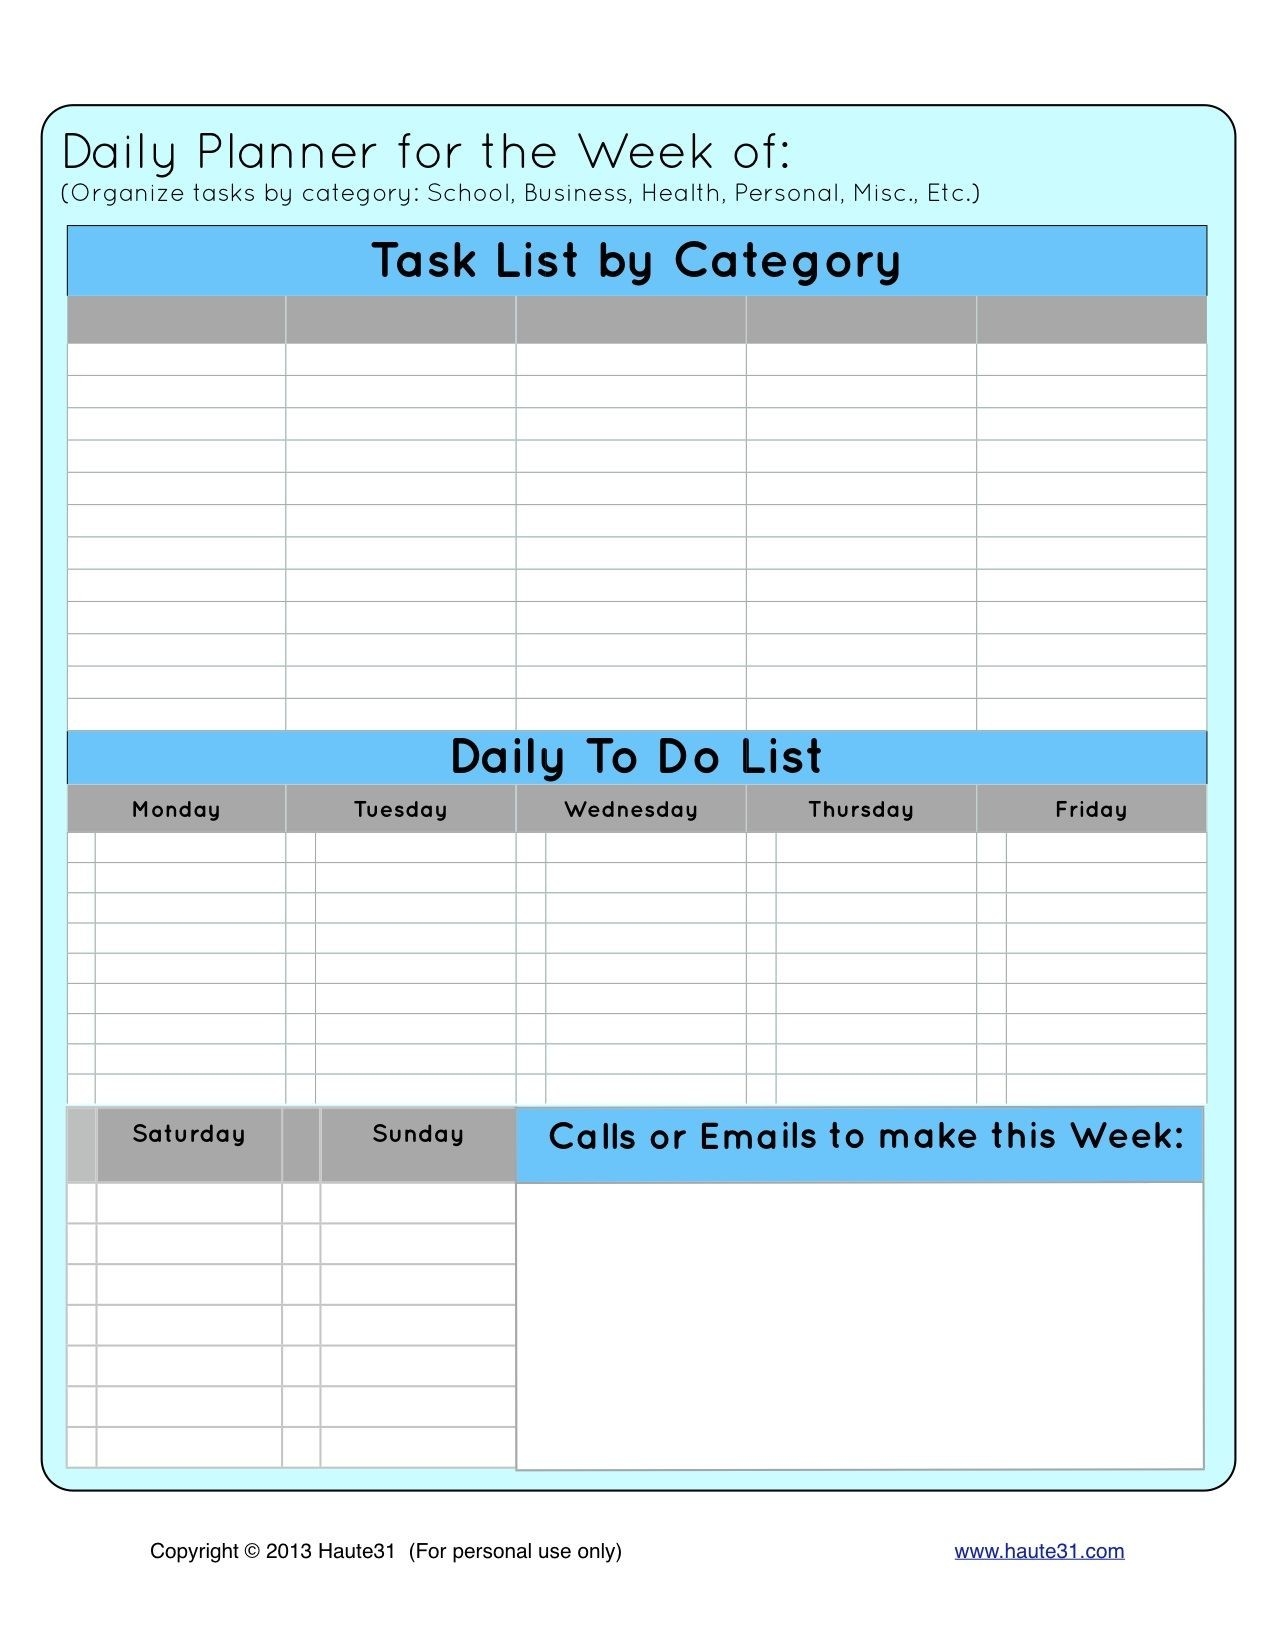 Daily Planner For The Week | Weekly Planner Printable, Daily  Business Monday To Friday Daily Planner